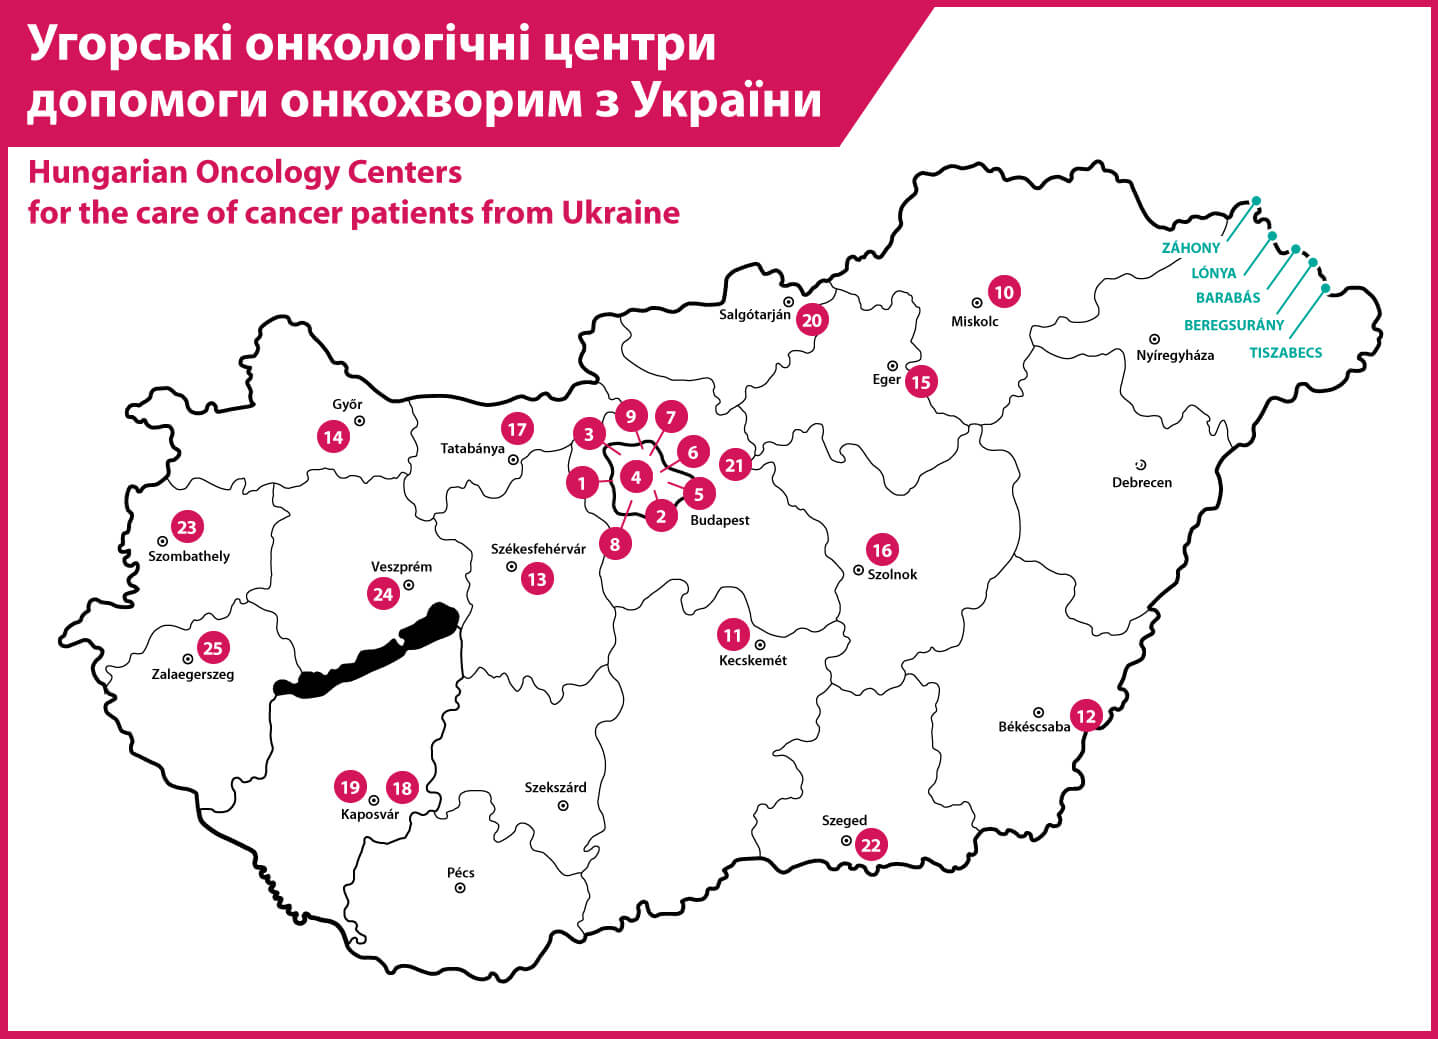 Hungarian Oncology Centers